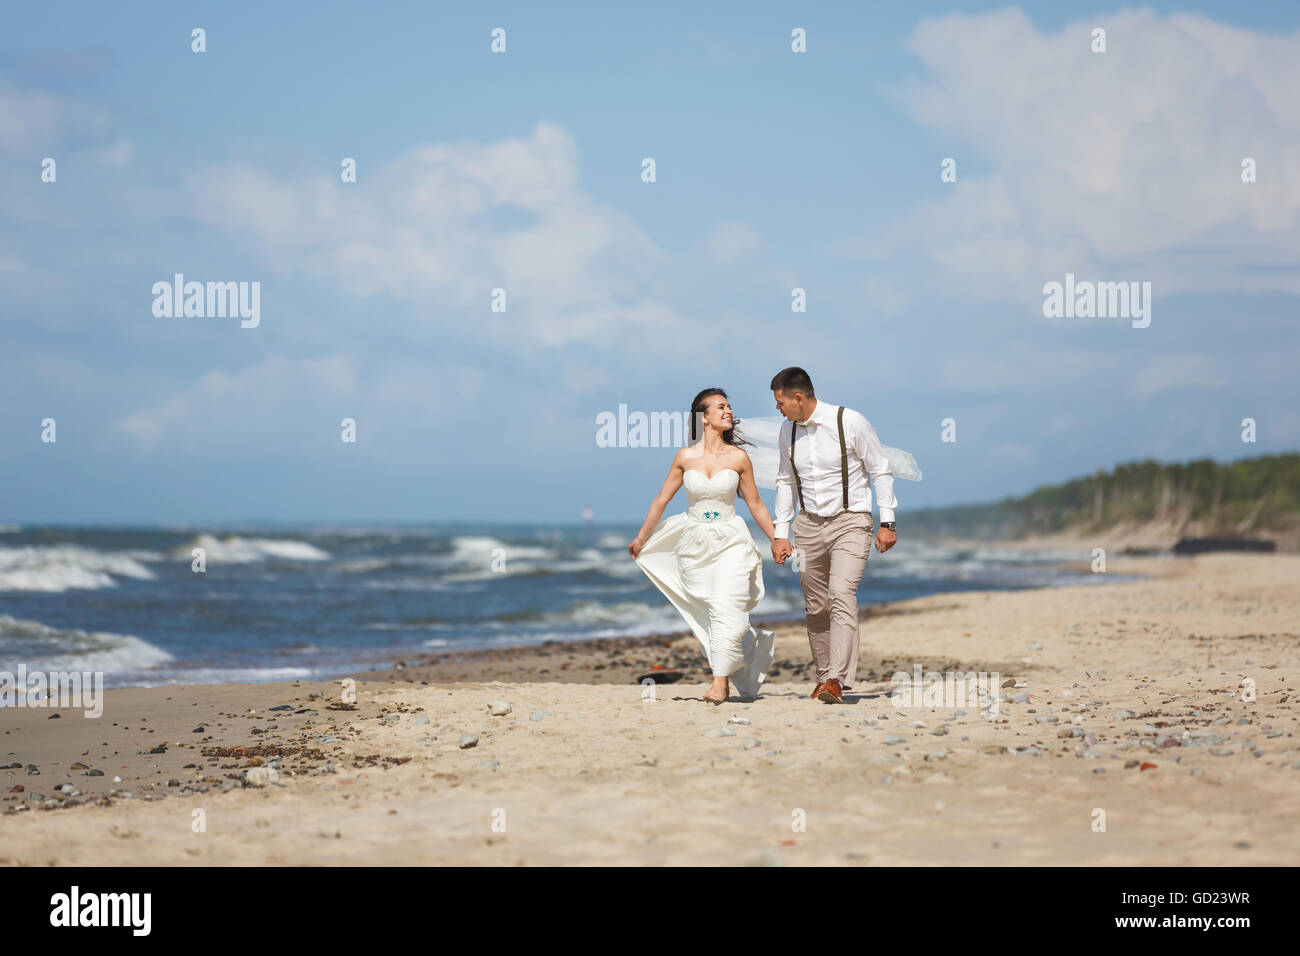 Cheerful wedding couple running on the beach at summer time Stock Photo